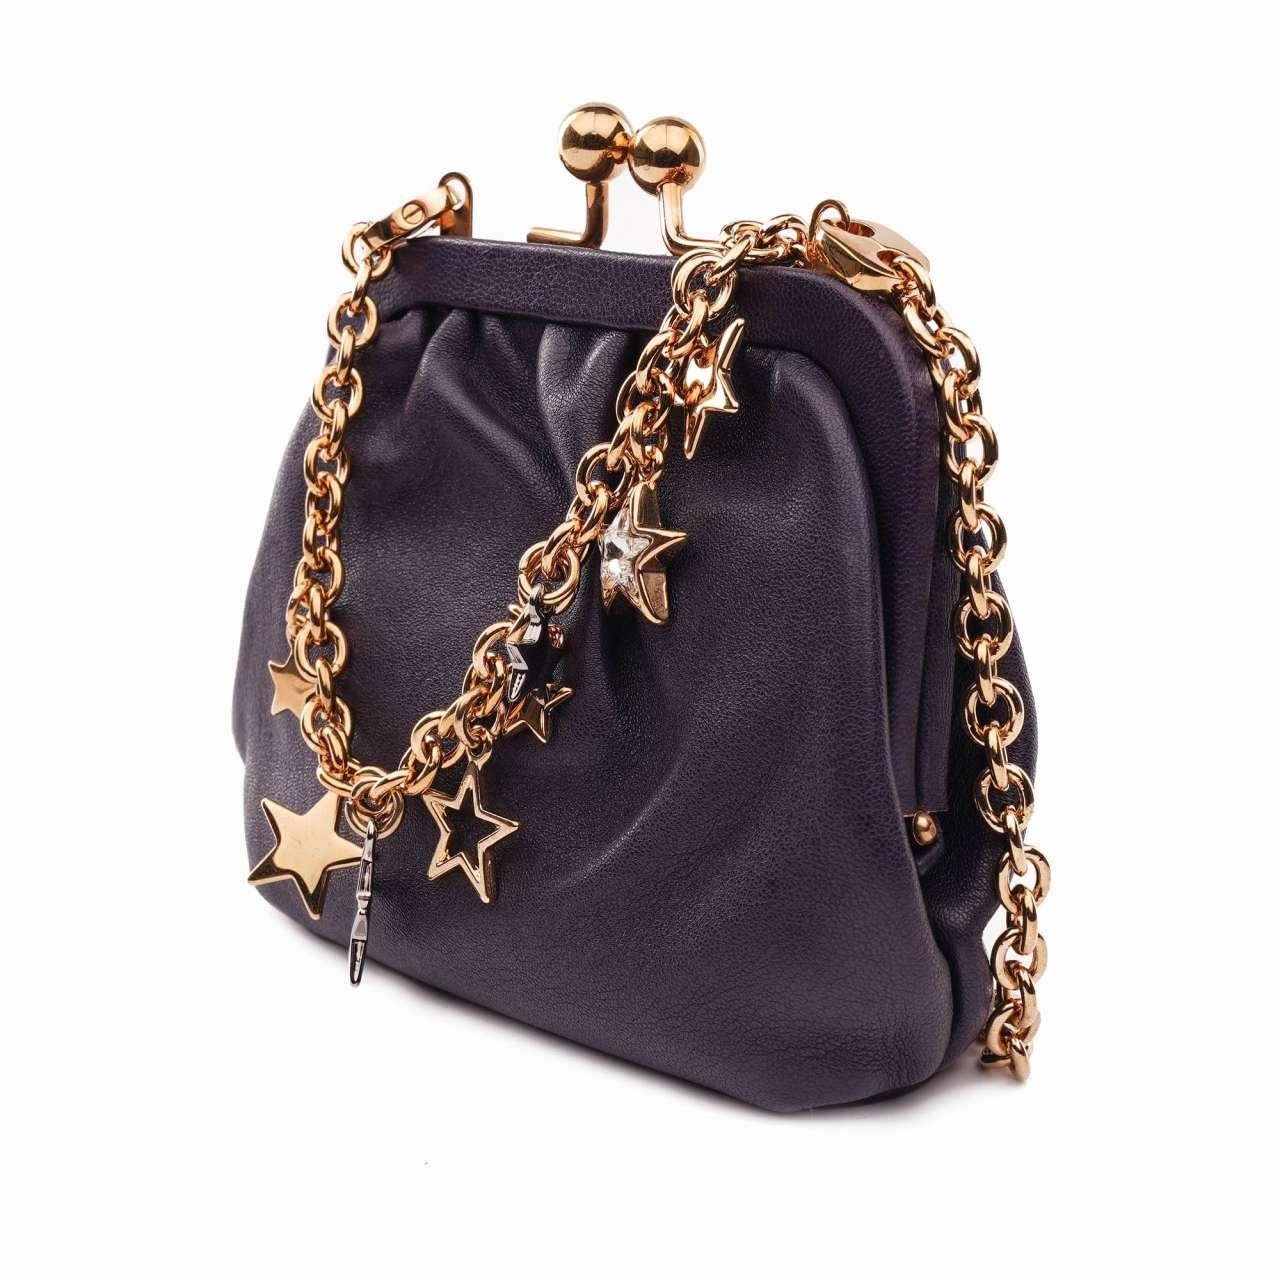 - Lambskin purse bag with metal stars crystal chain strap in purple and gold by DOLCE & GABBANA - New with Tag, Dustbag, Authenticity Card - Material: 100% Lambskin - Lining: Fabric - Interior: leather logo plate - Chain strap not removable (appr.